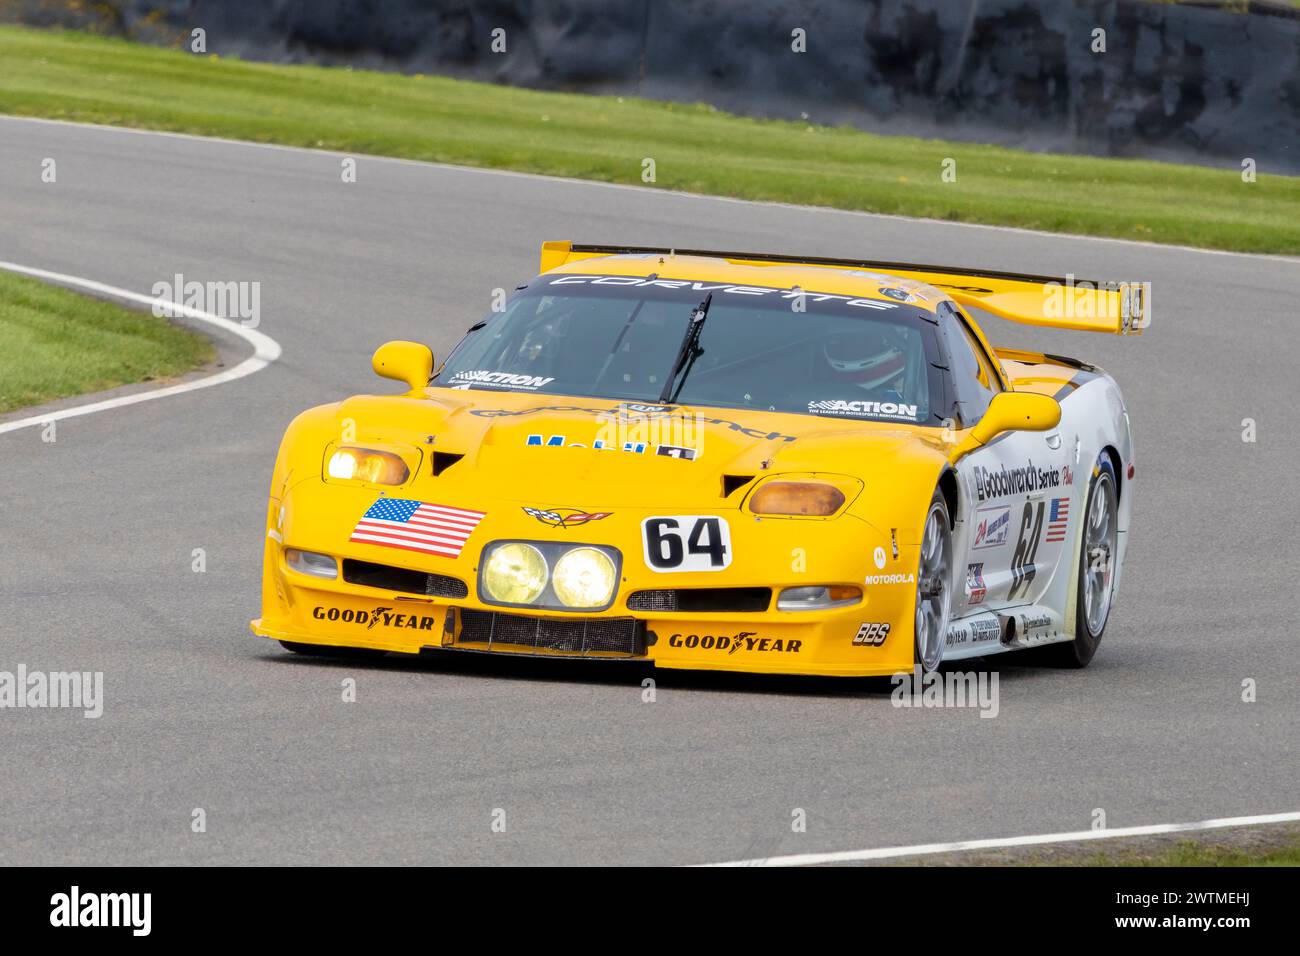 Olivier Galant in the 2000 Chevrolet Corvette C5-R GT1 endurance racer at the Goodwood 80th Members Meeting, Sussex, UK. Stock Photo